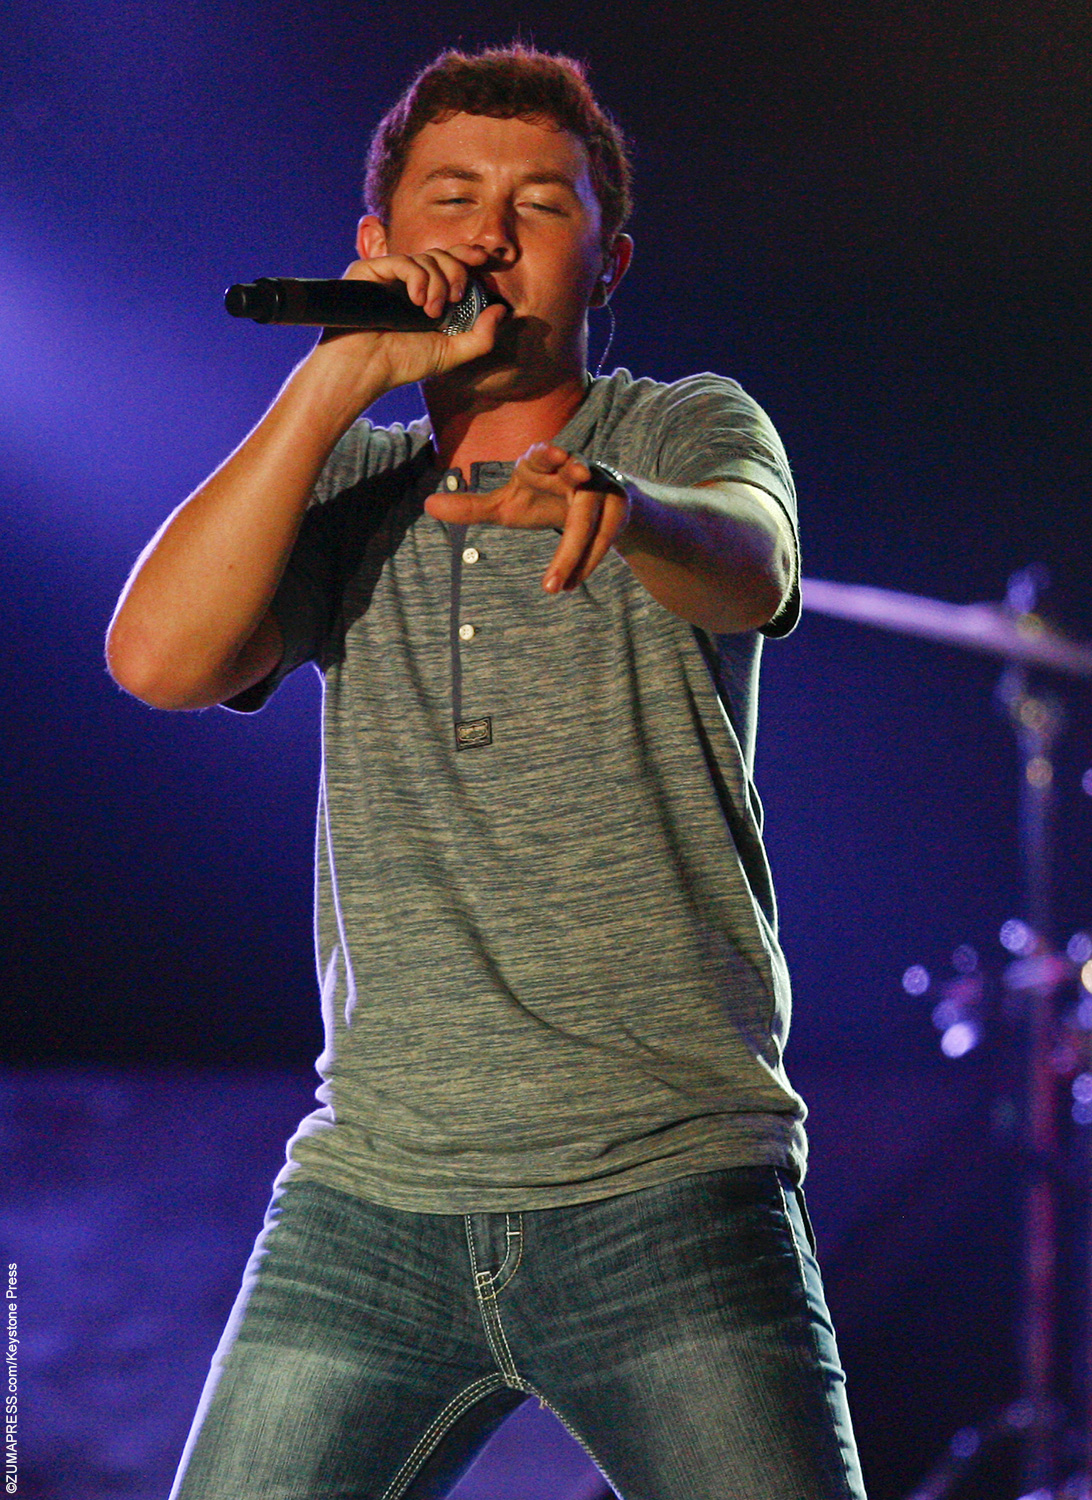 Scotty McCreery won American Idol at the age of 16 in the show’s 10th season. Known for his deep voice, Scotty’s debut album went platinum and his Christmas album went gold. Now just 20, he has produced three albums and is currently attending North Carolina State University part-time.